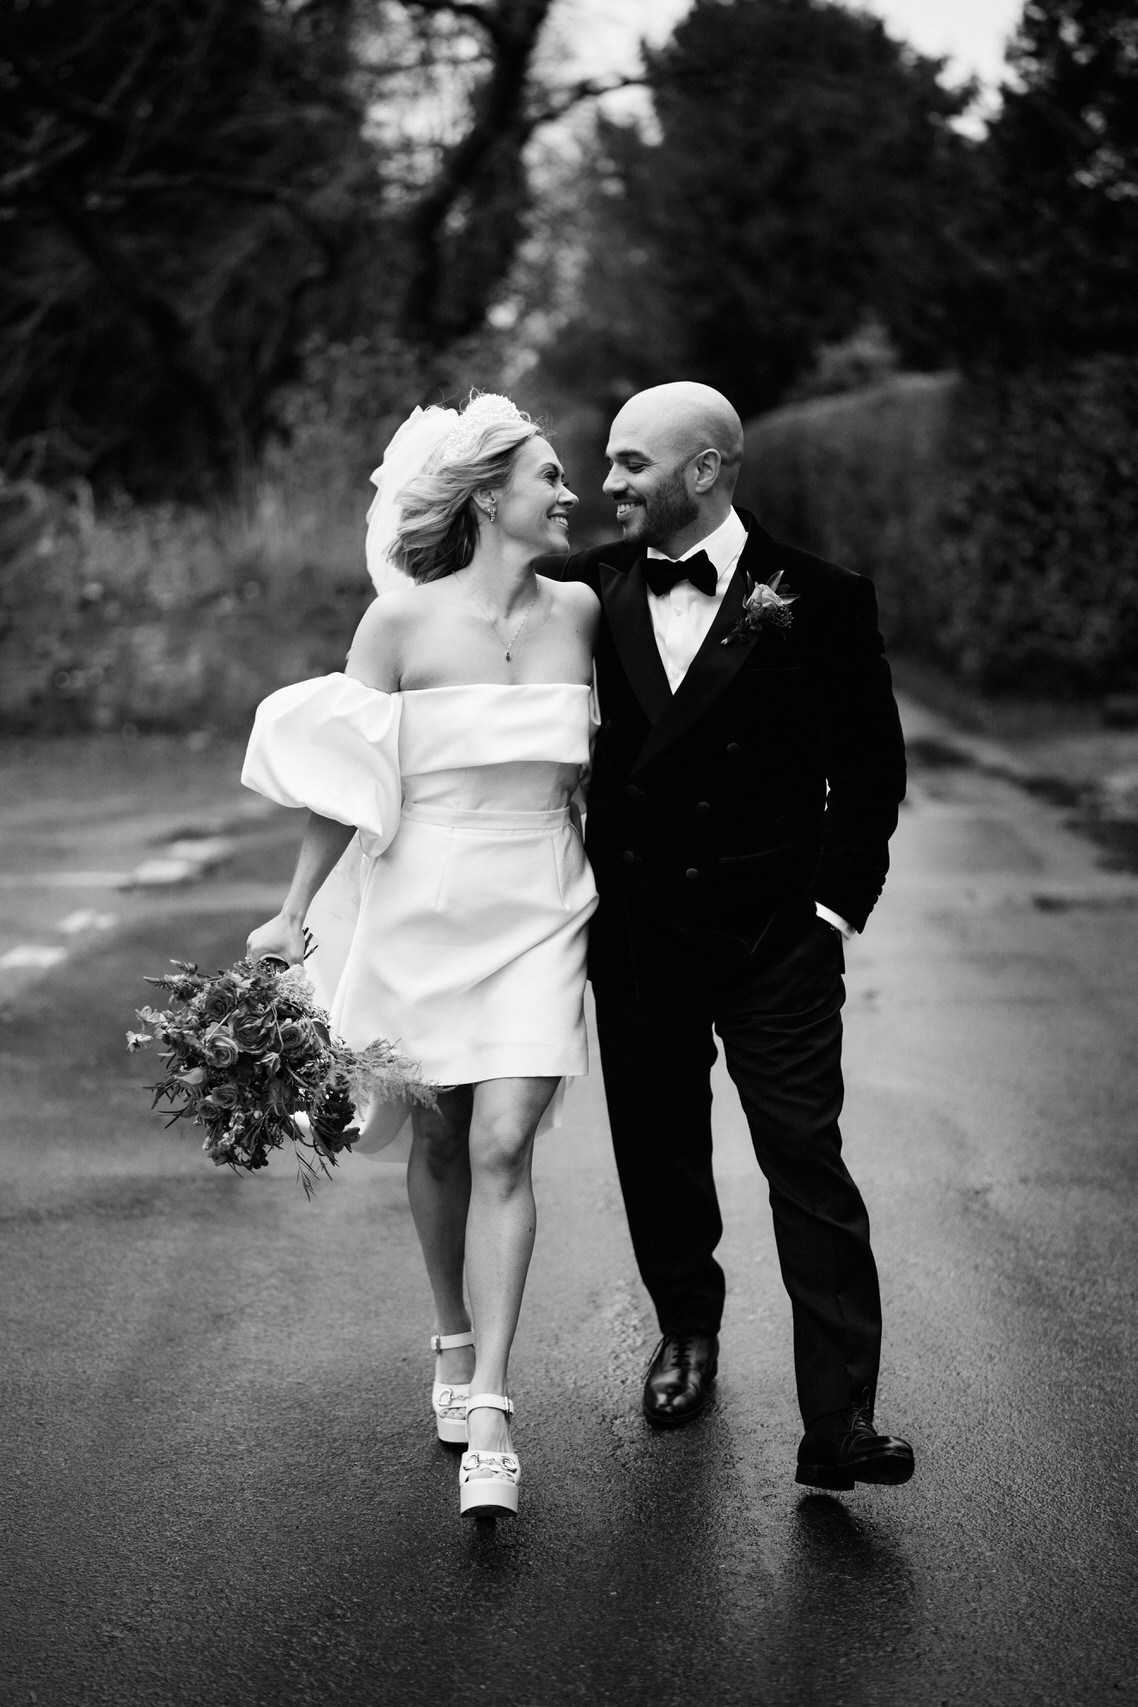 A black and white picture of a newlywed couple walking in the rain.